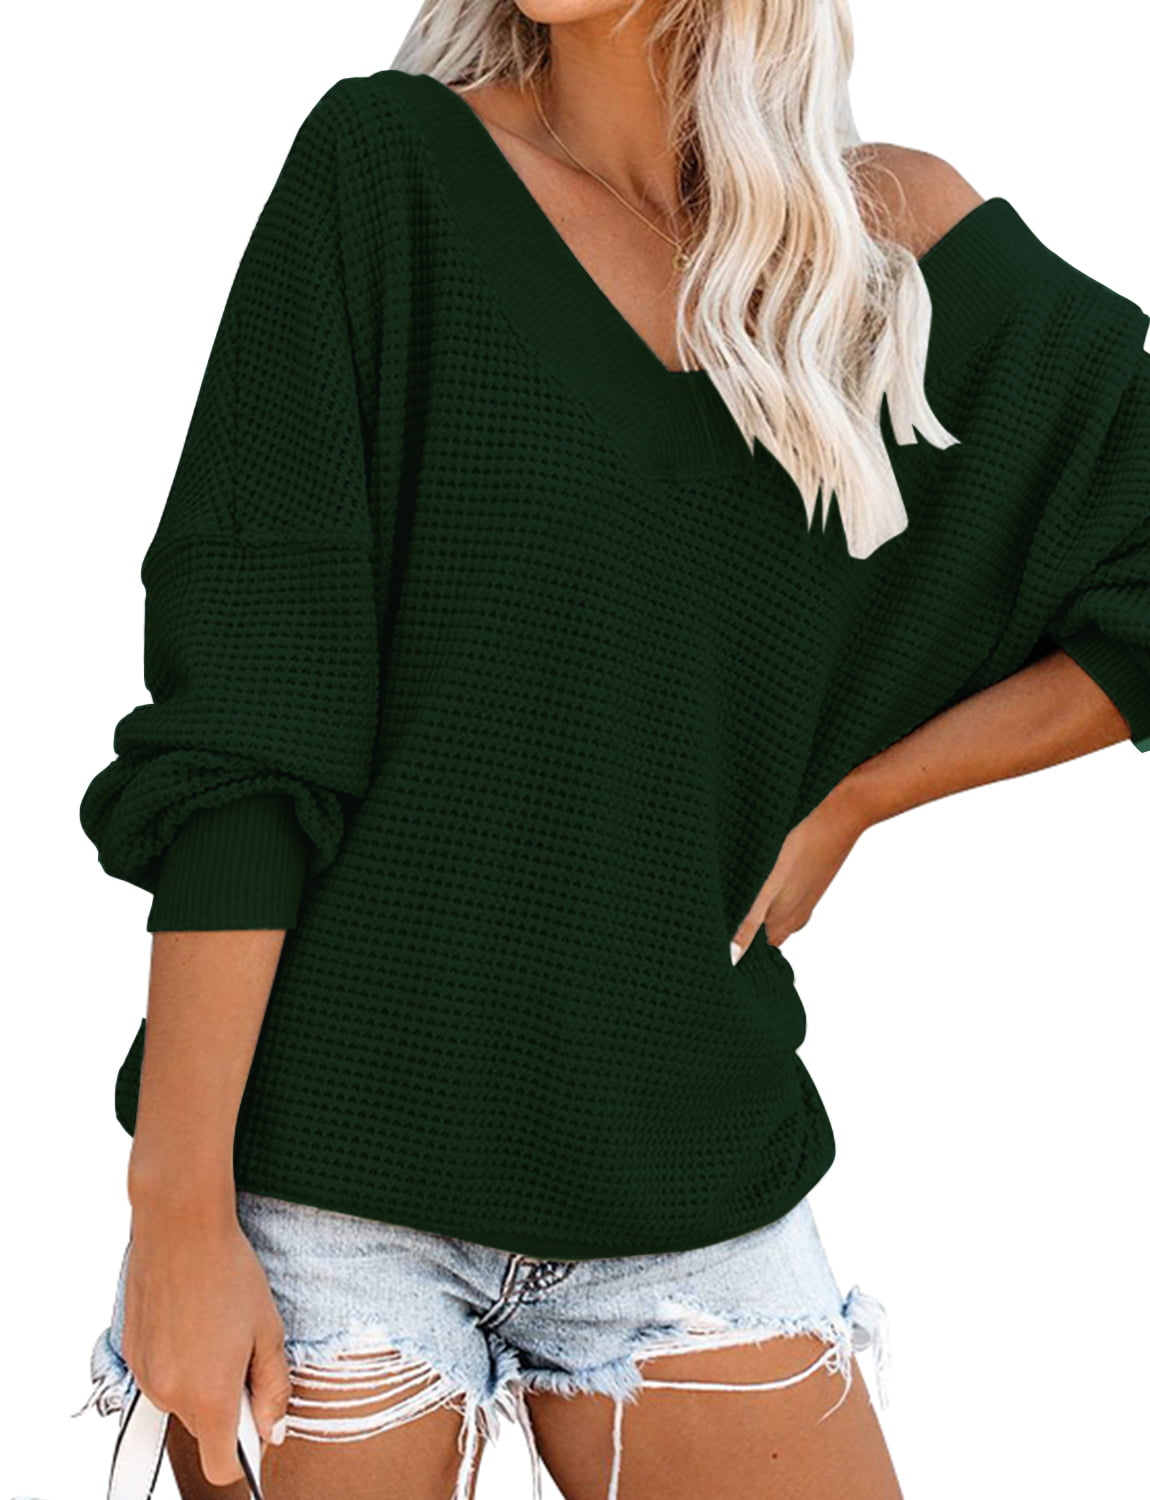 Bbymie Off Shoulder Tops for Women Long Sleeve Oversized Pullover Waffle Knit Top